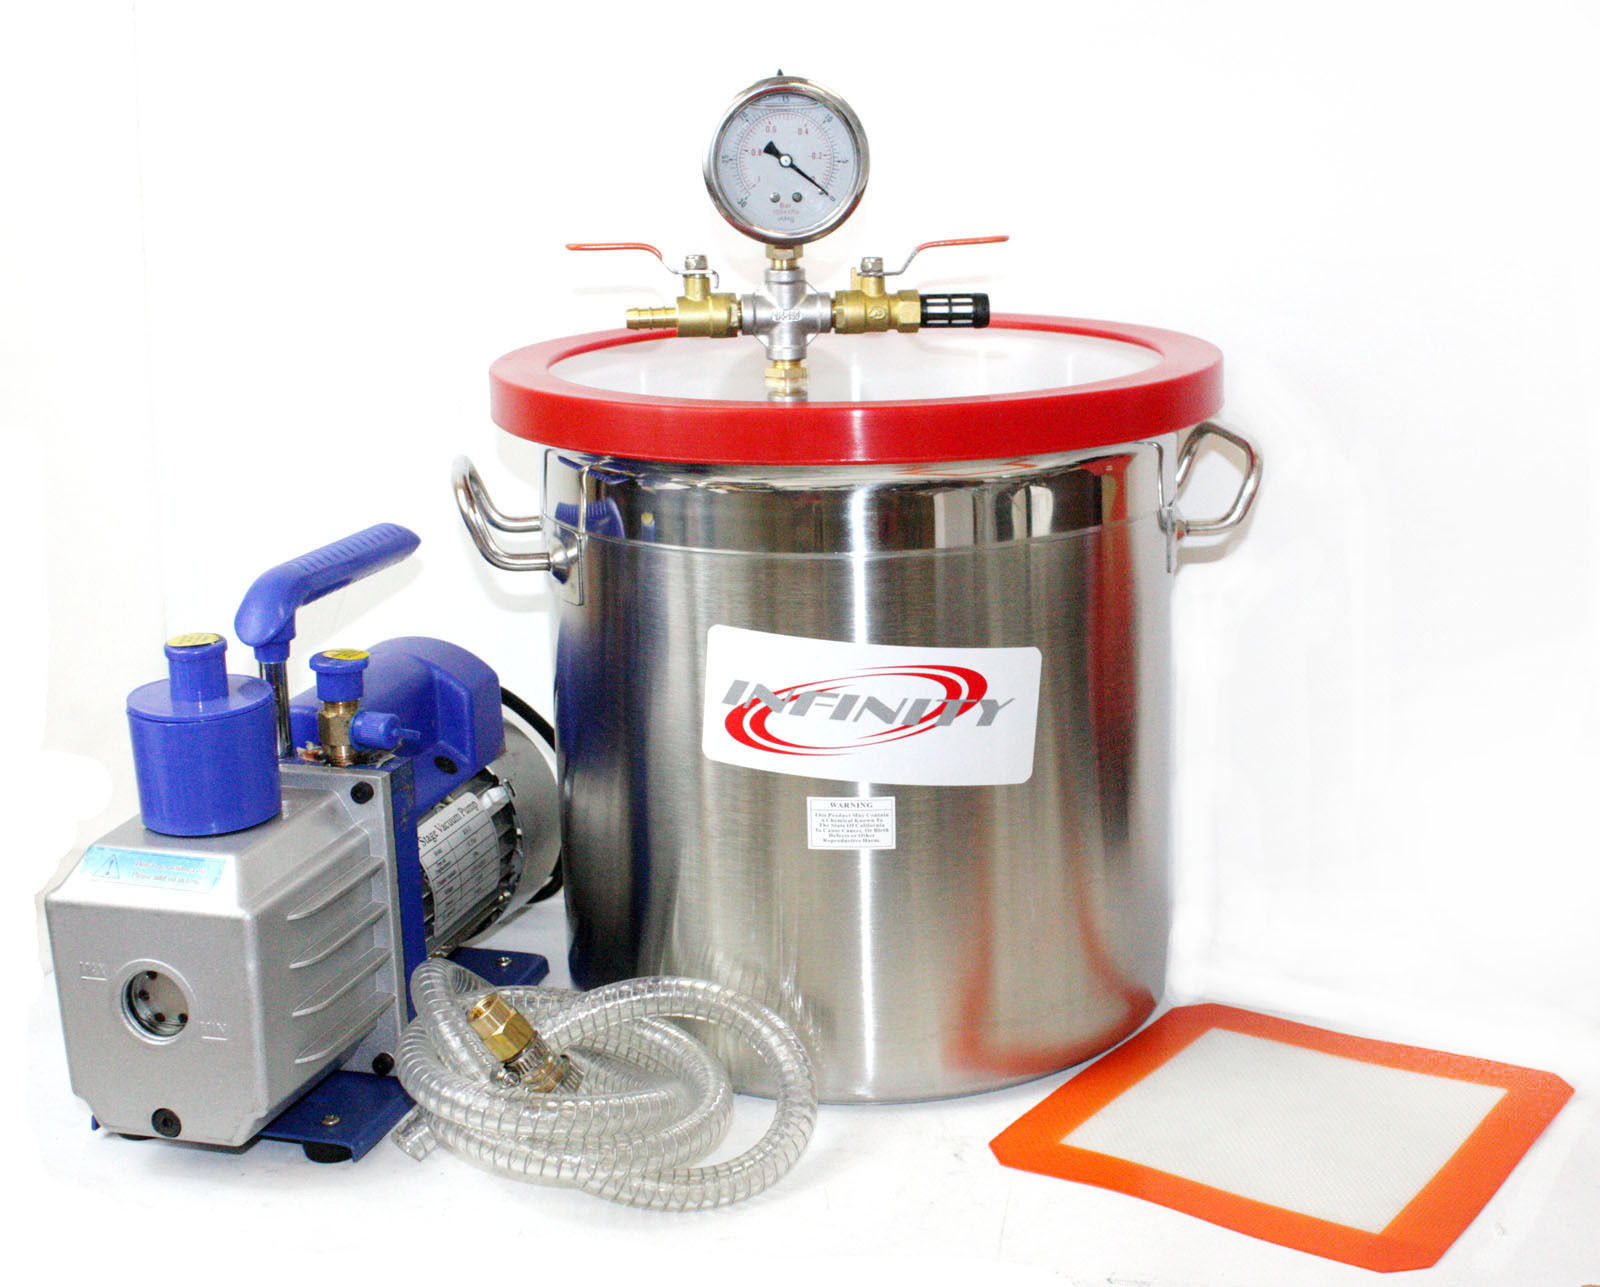 Shipped from US Zinnor 5 Gallon Stainless Steel Vacuum Degassing Chamber Silicone Kit w/3 CFM Pump Hose 3-6 Days 